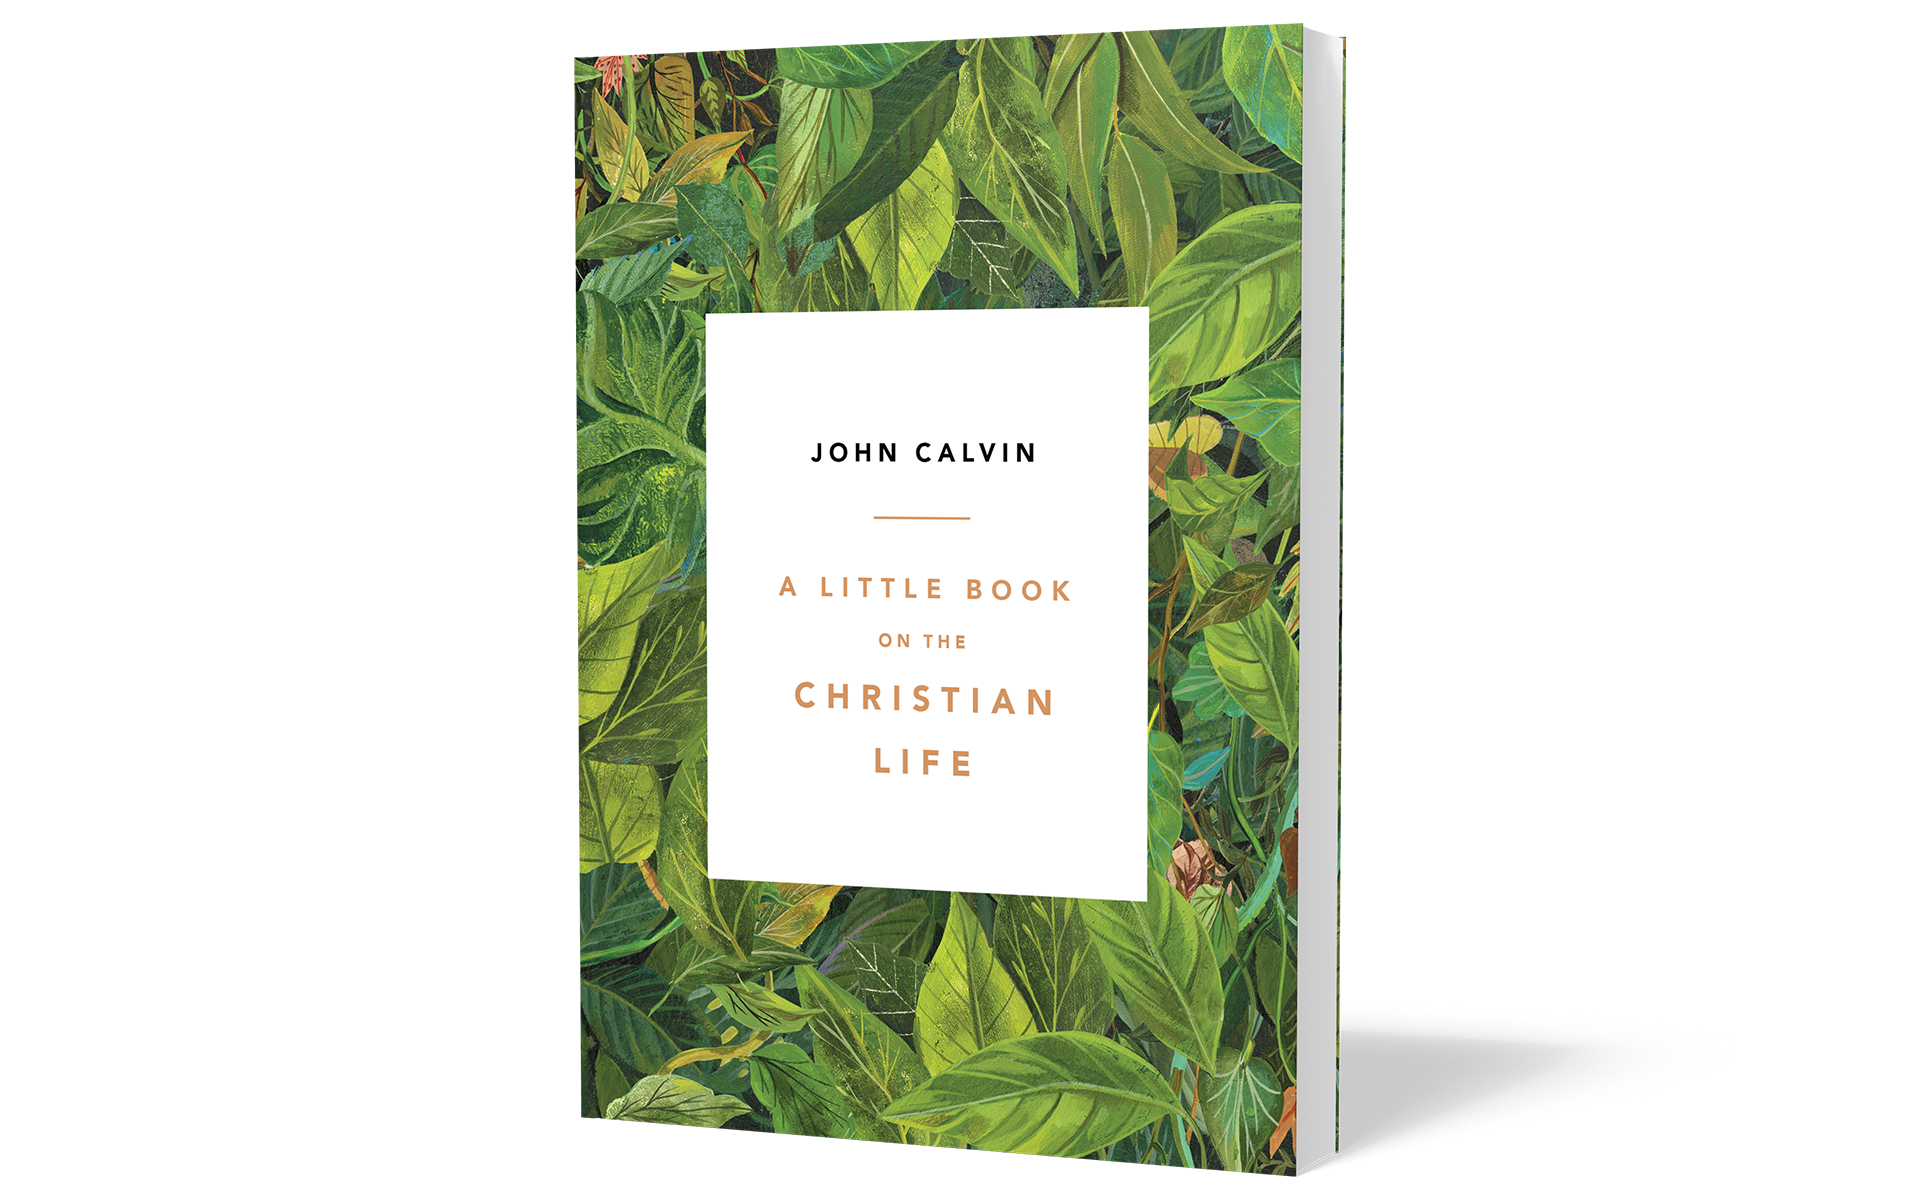 A Little Book on the Christian Life, leaves cover